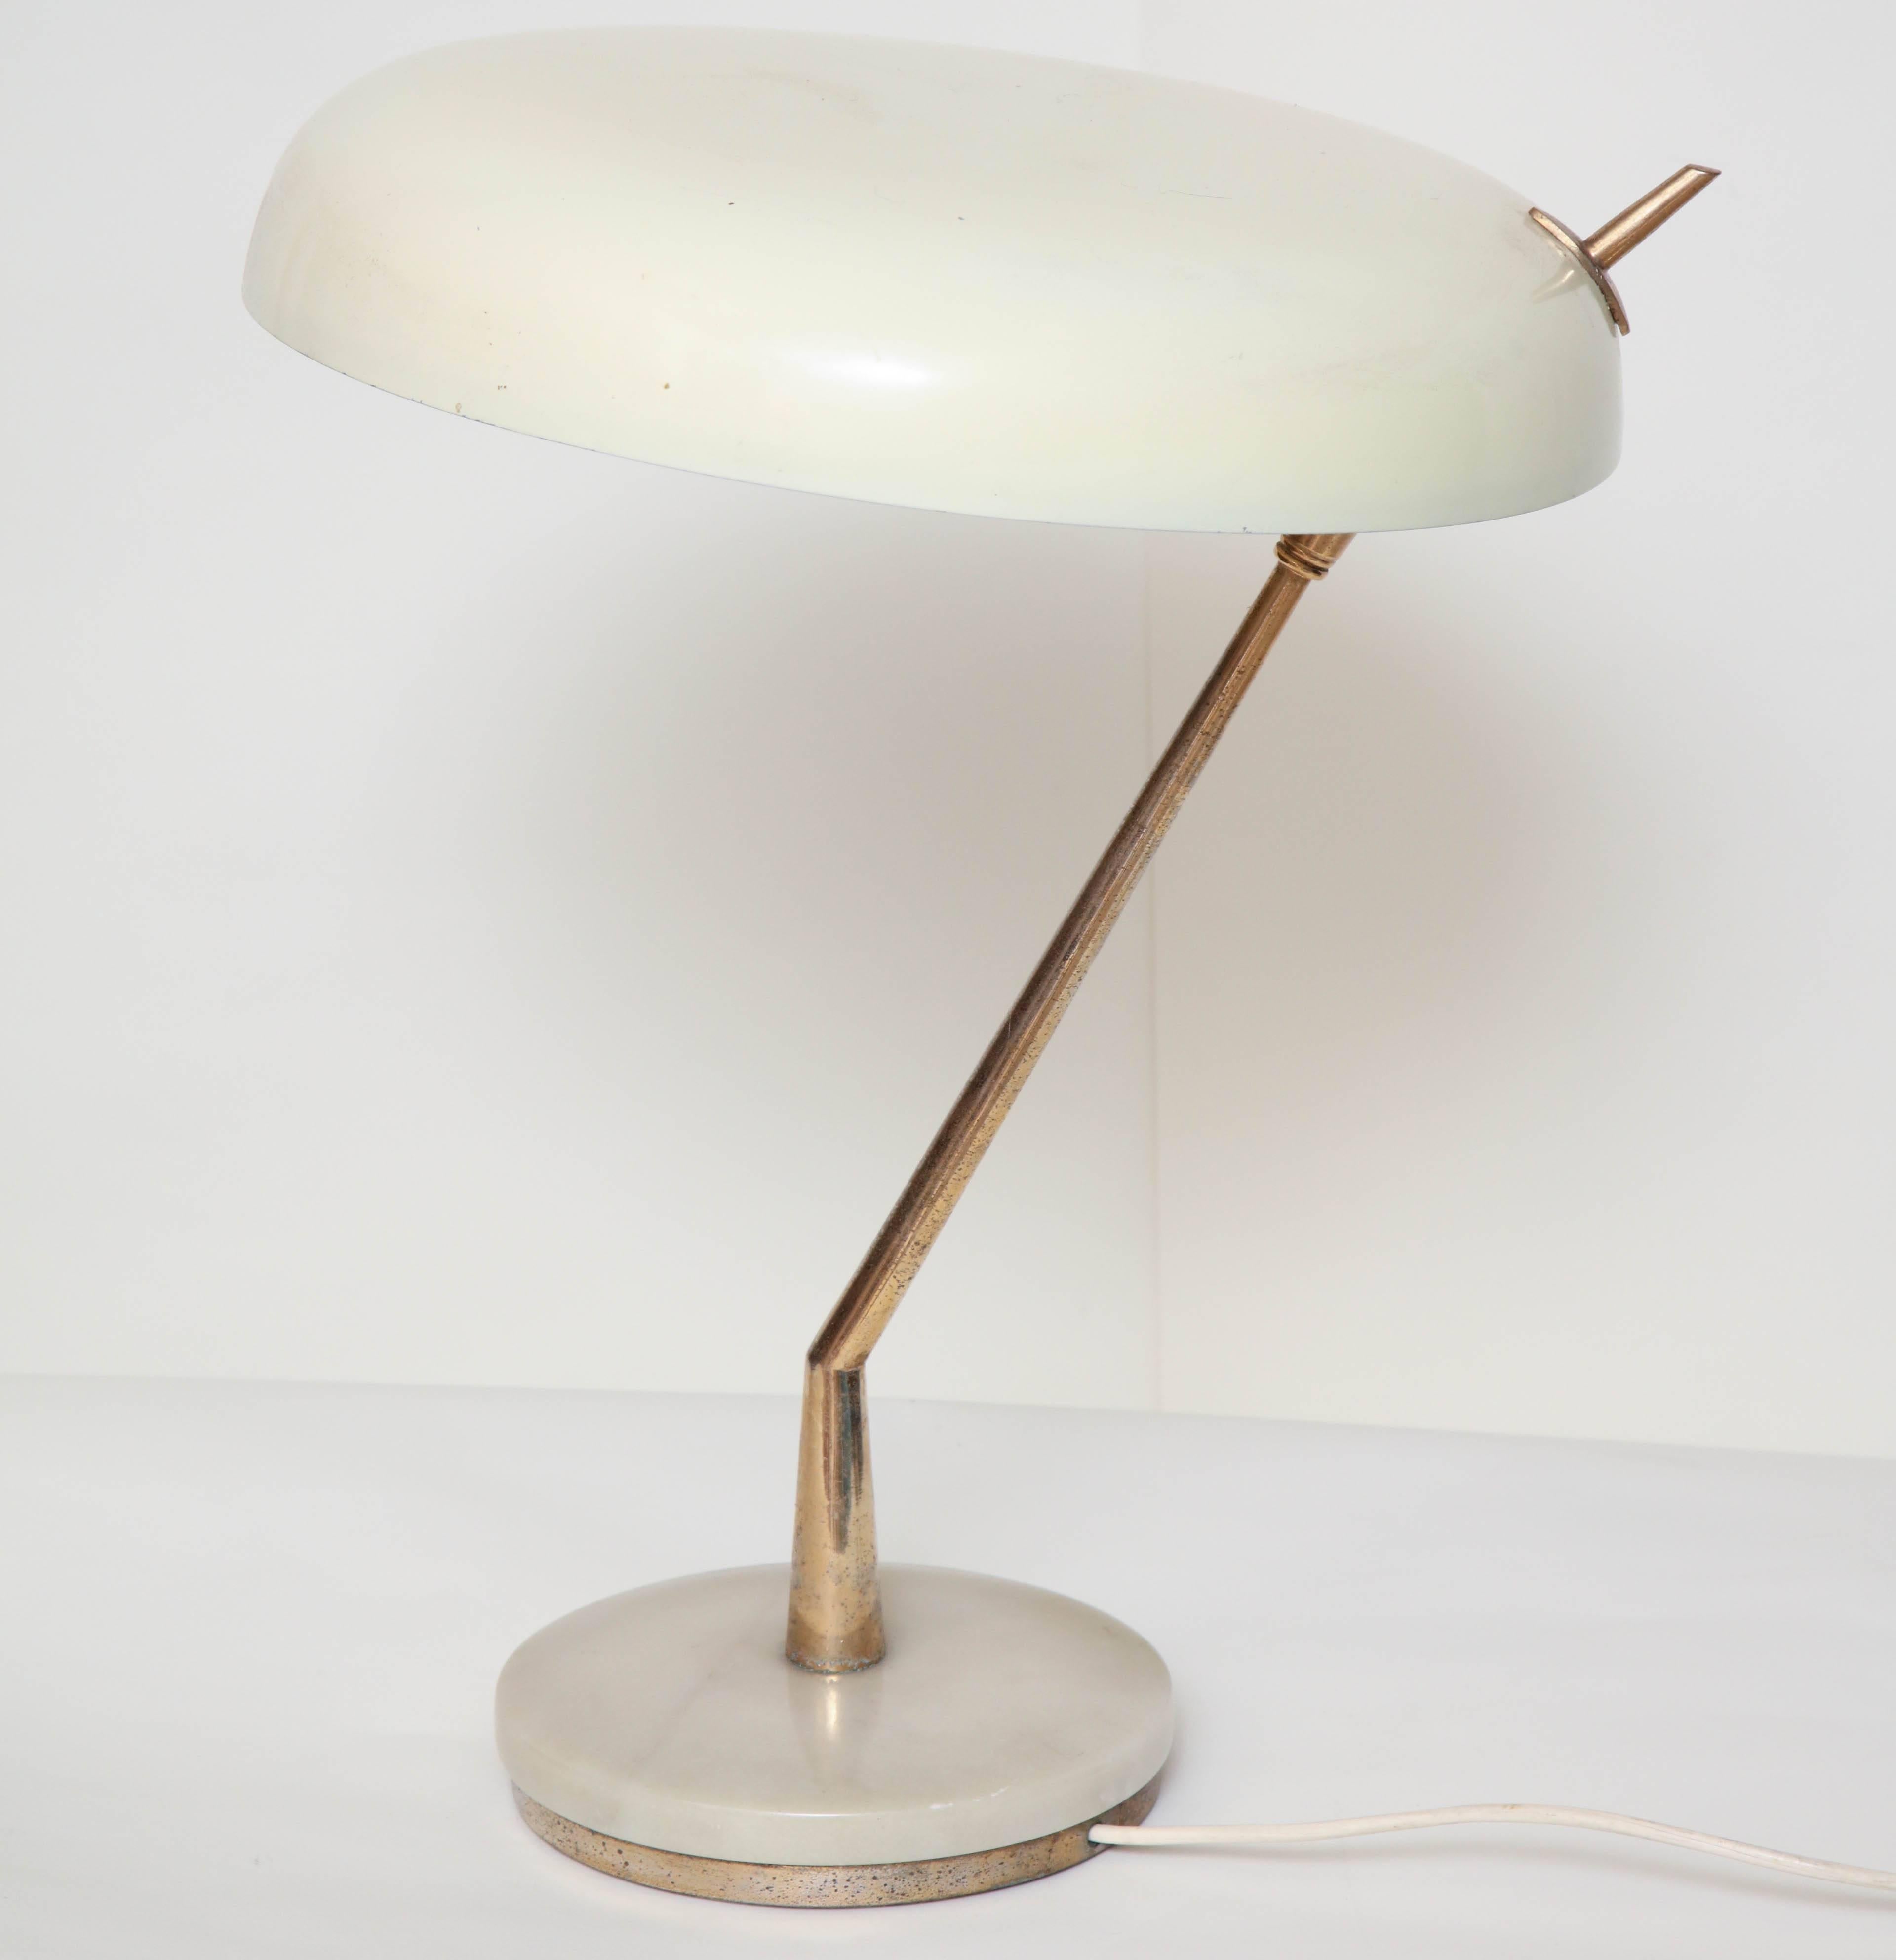 Articulated Table Lamp Attributed to Arredoluce Italian Mid-Century Modern, 1950 1